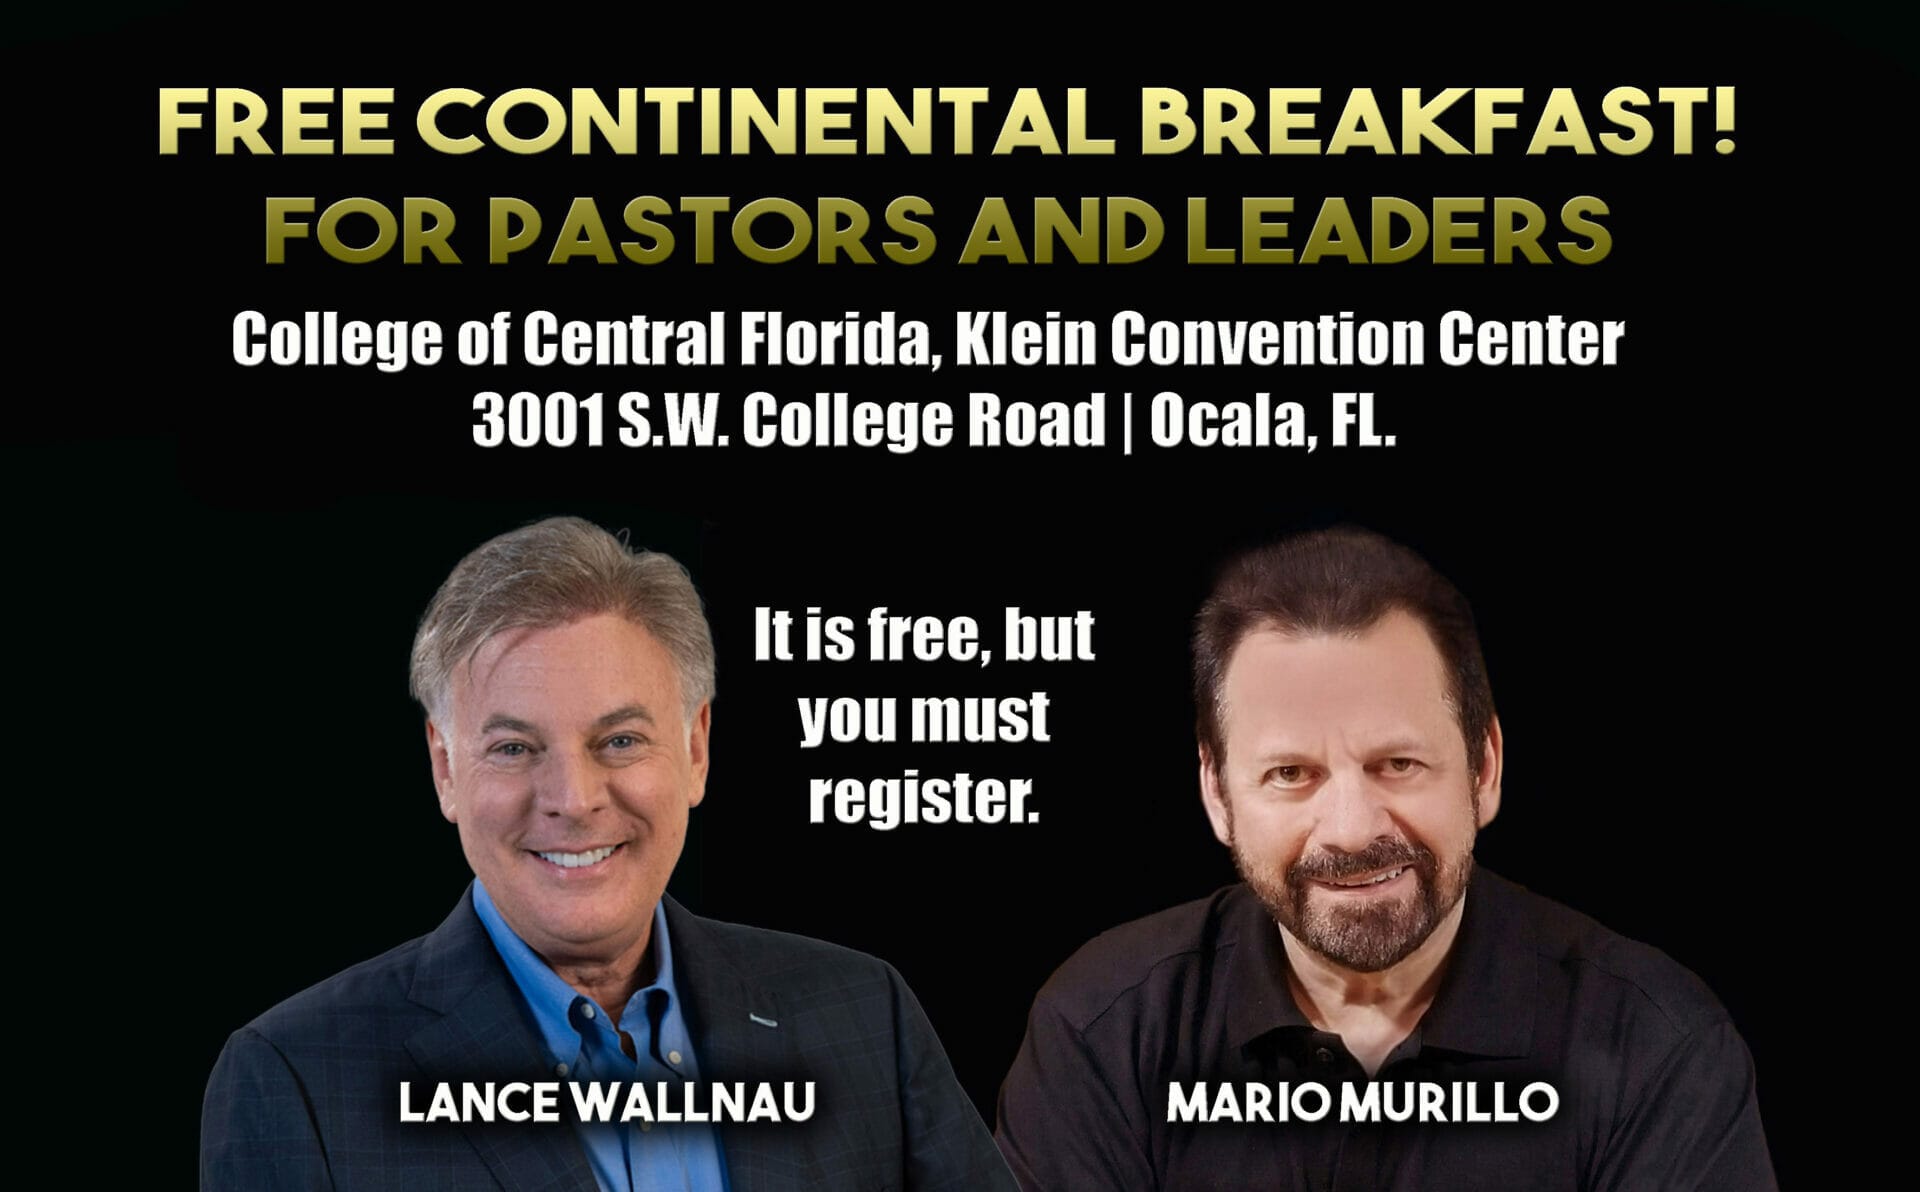 Free continental breakfast at Ocala, FL with Mario and Lance